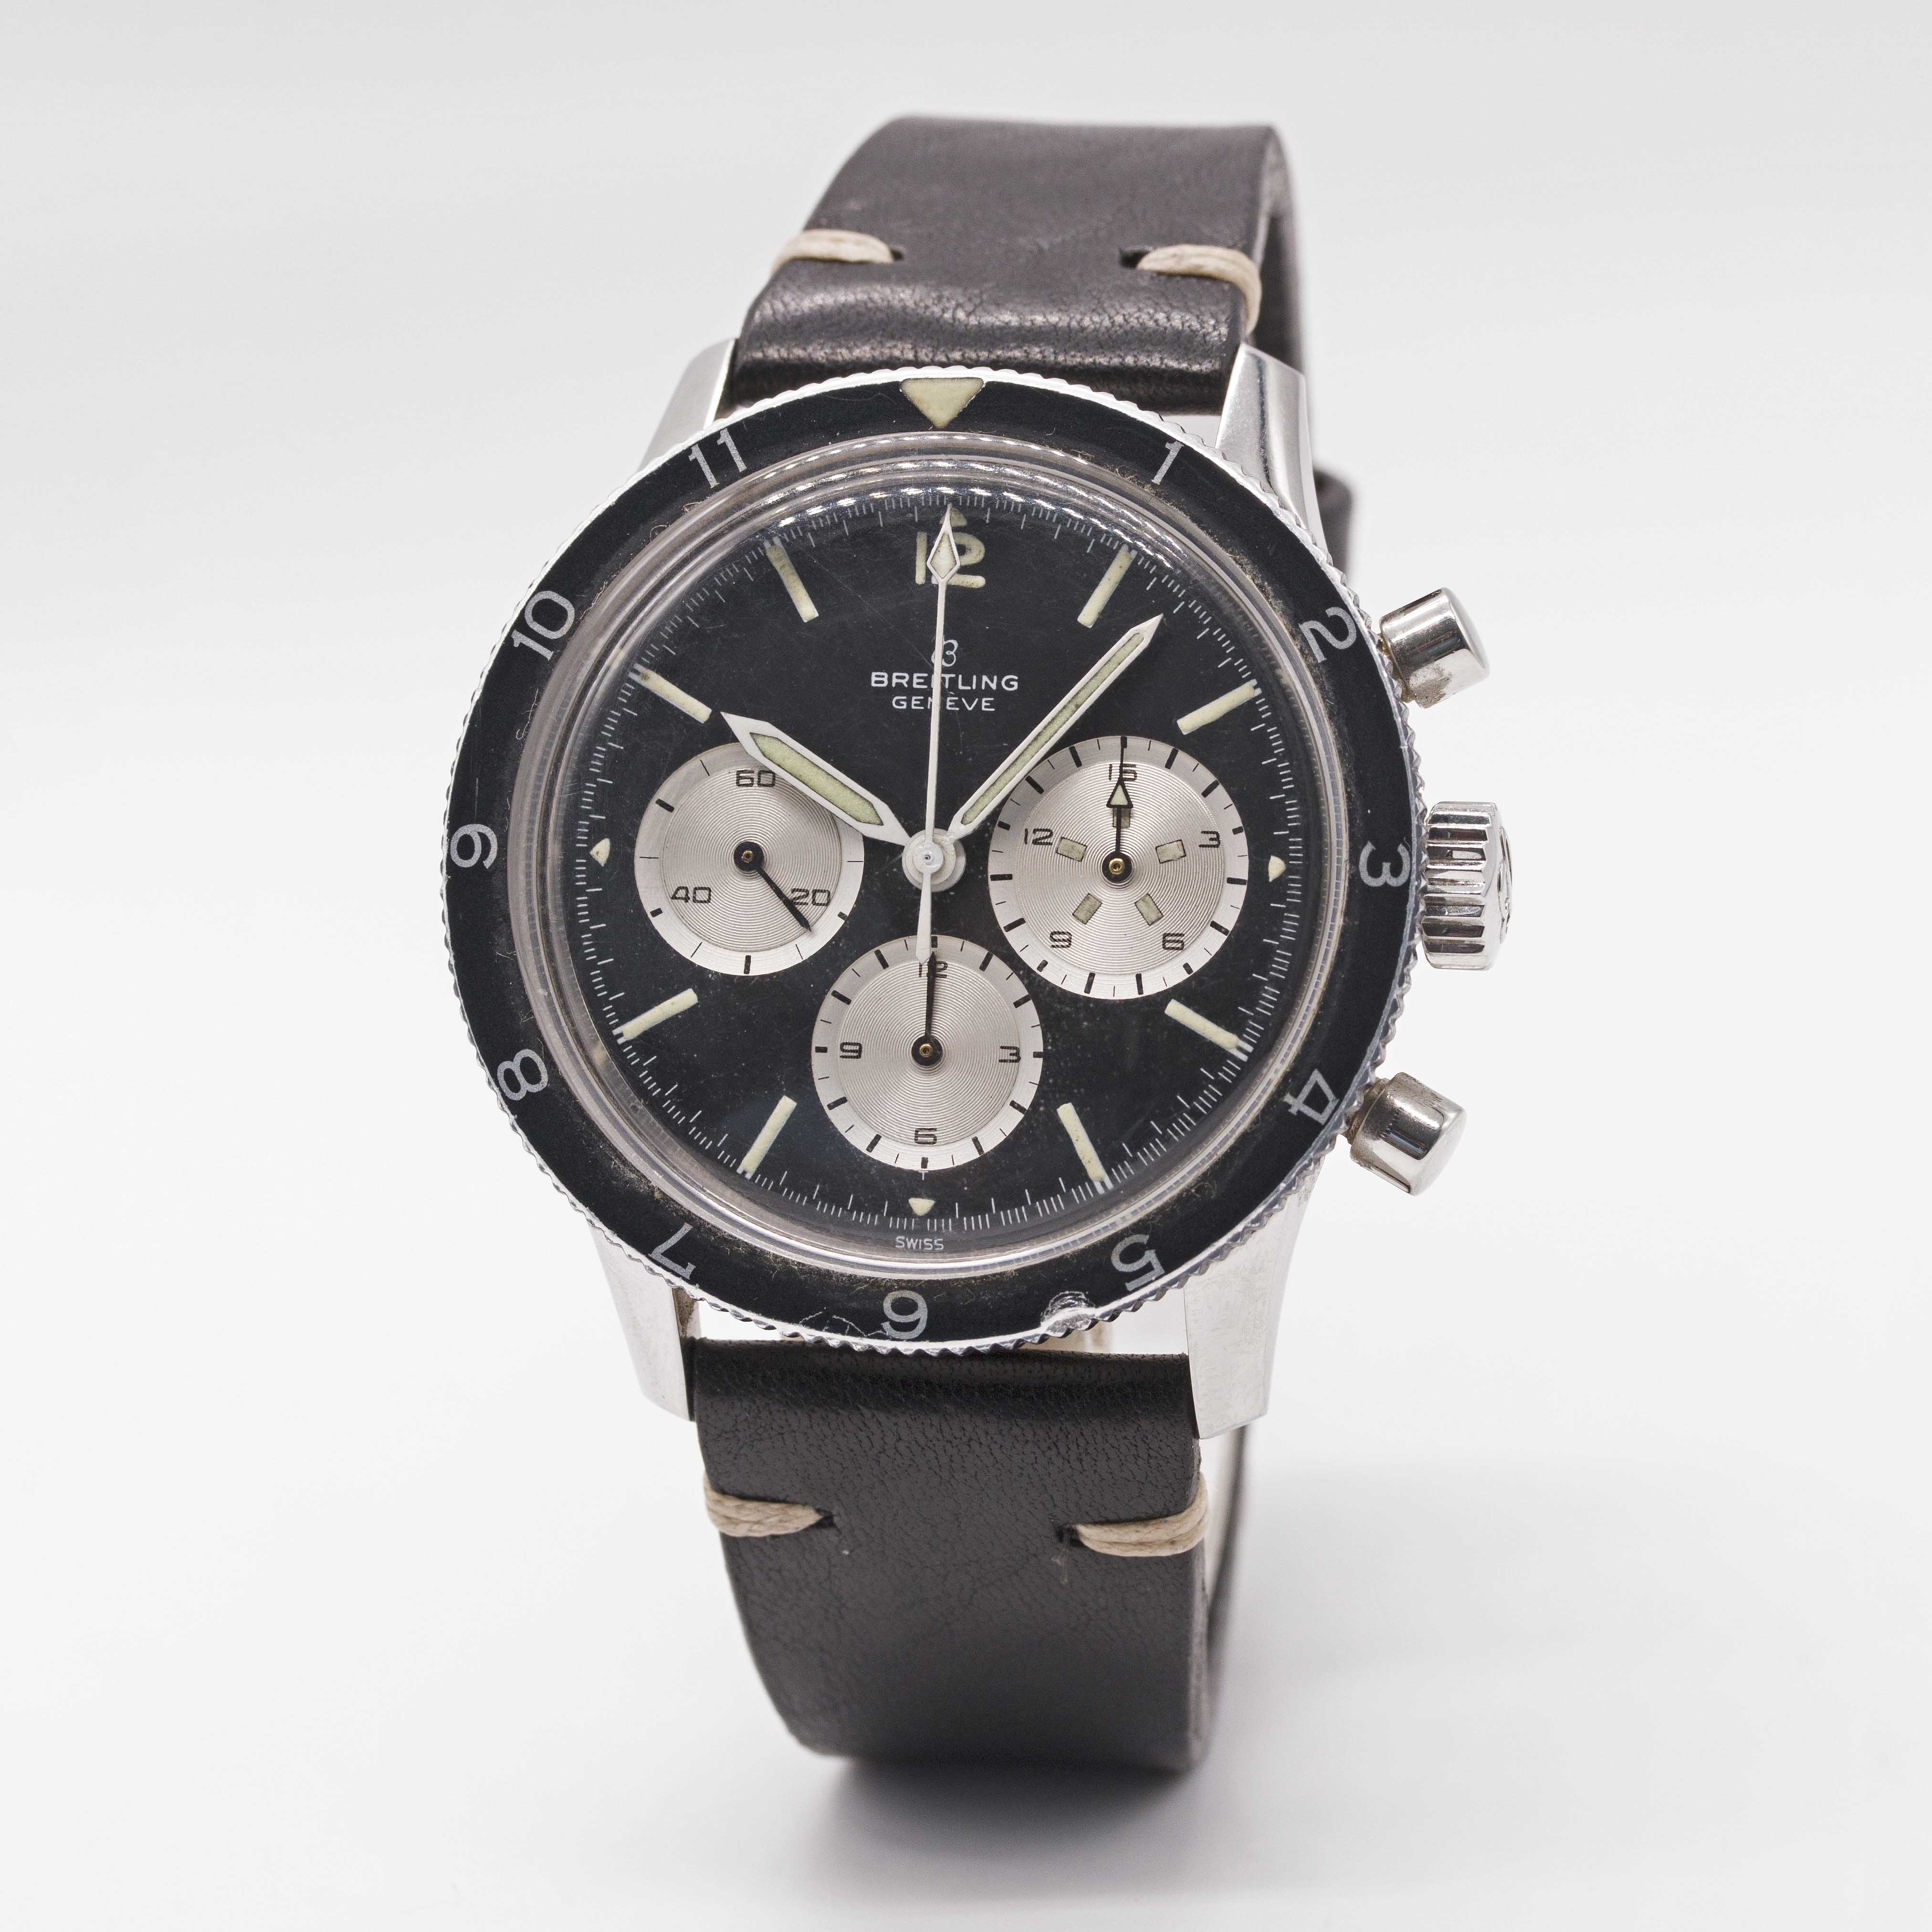 A RARE GENTLEMAN'S STAINLESS STEEL BREITLING CO PILOT "JEAN-CLAUDE KILLY" CHRONOGRAPH WRIST WATCH - Image 5 of 9